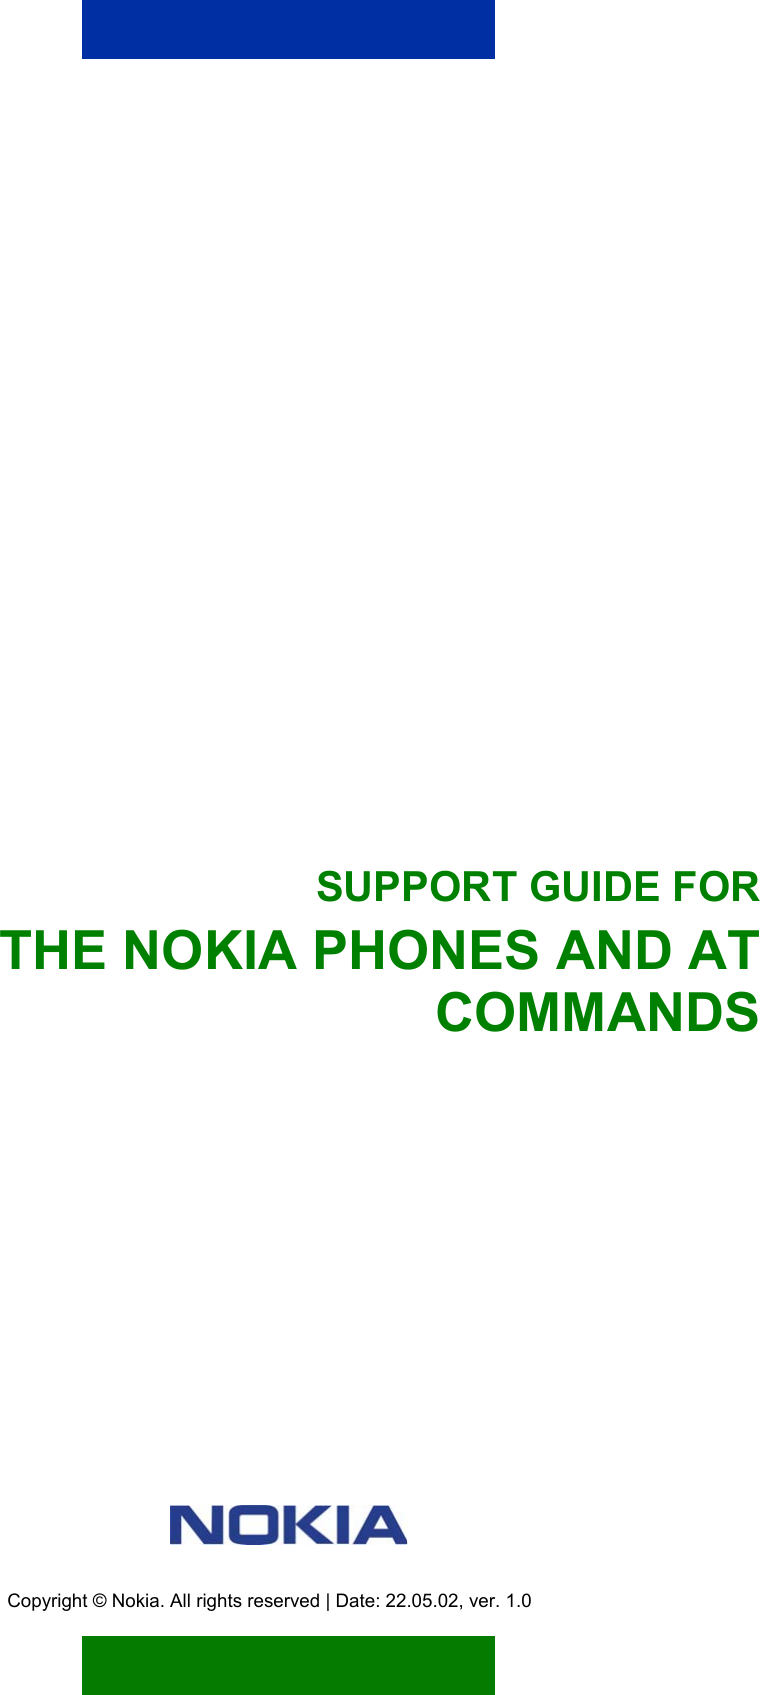 Page 1 of 8 - Alvarez NA Support Guide For The Nokia Phones And AT Commands  To Manual 0a6b6aae-c9a5-481b-abcc-b4781d91f446